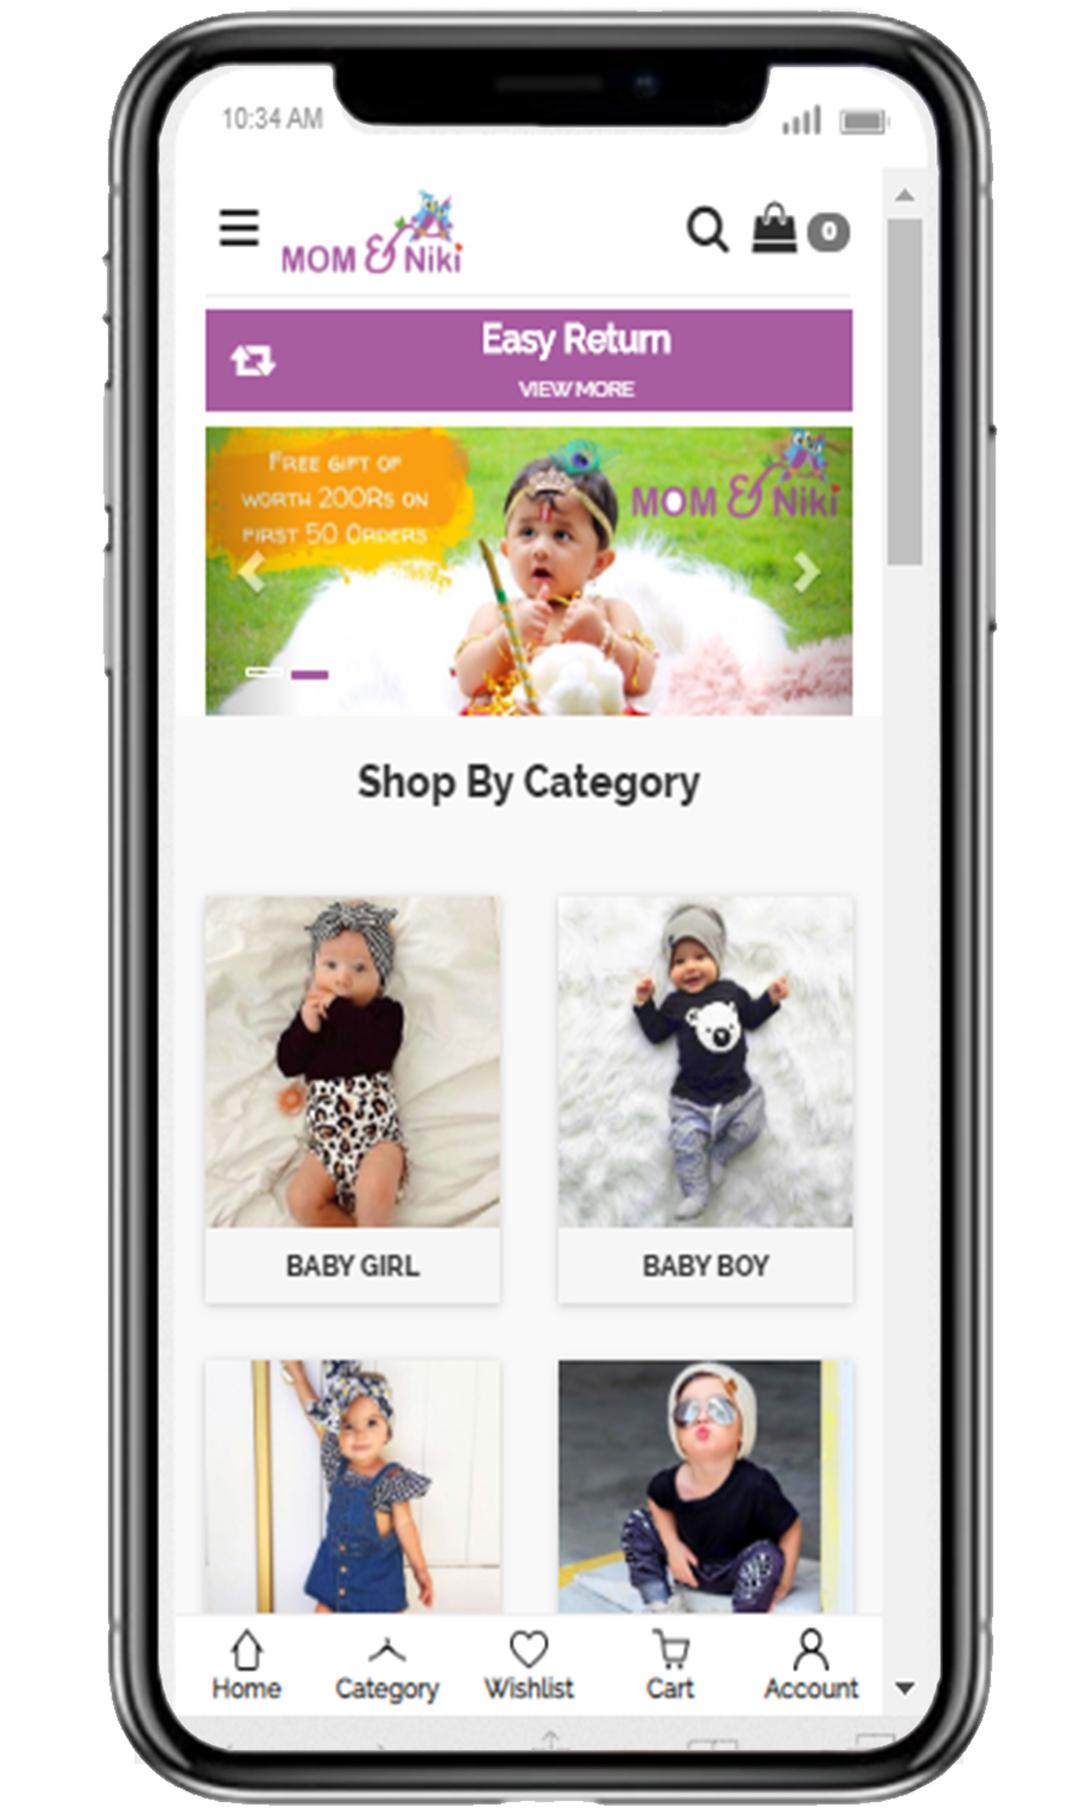 MOM and Niki Kids & Baby Clothing Online Shopping for Android - APK Download